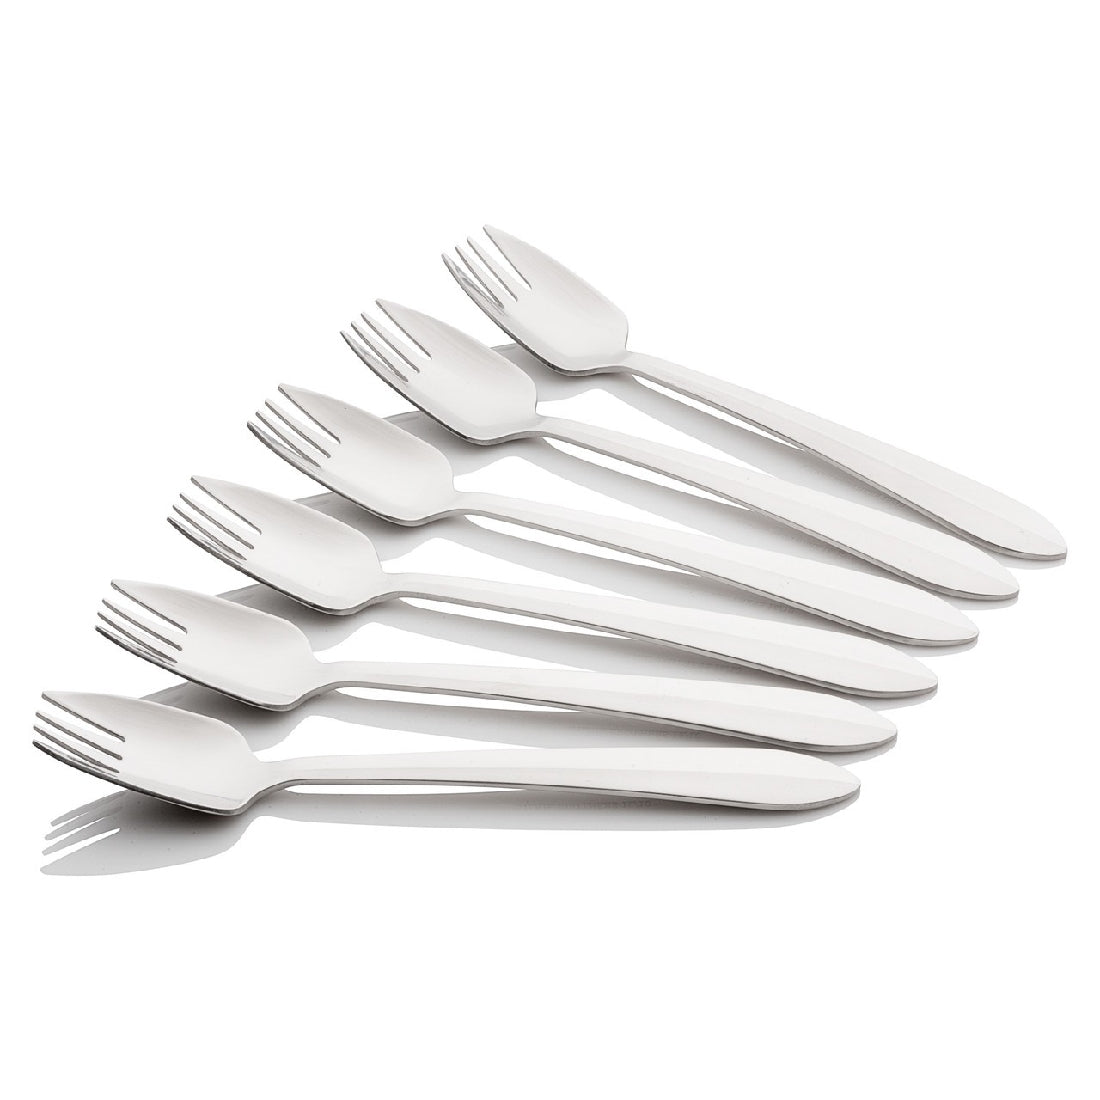 Wilkie Brothers 6 Piece Buffet Fork Set - Satin Finish